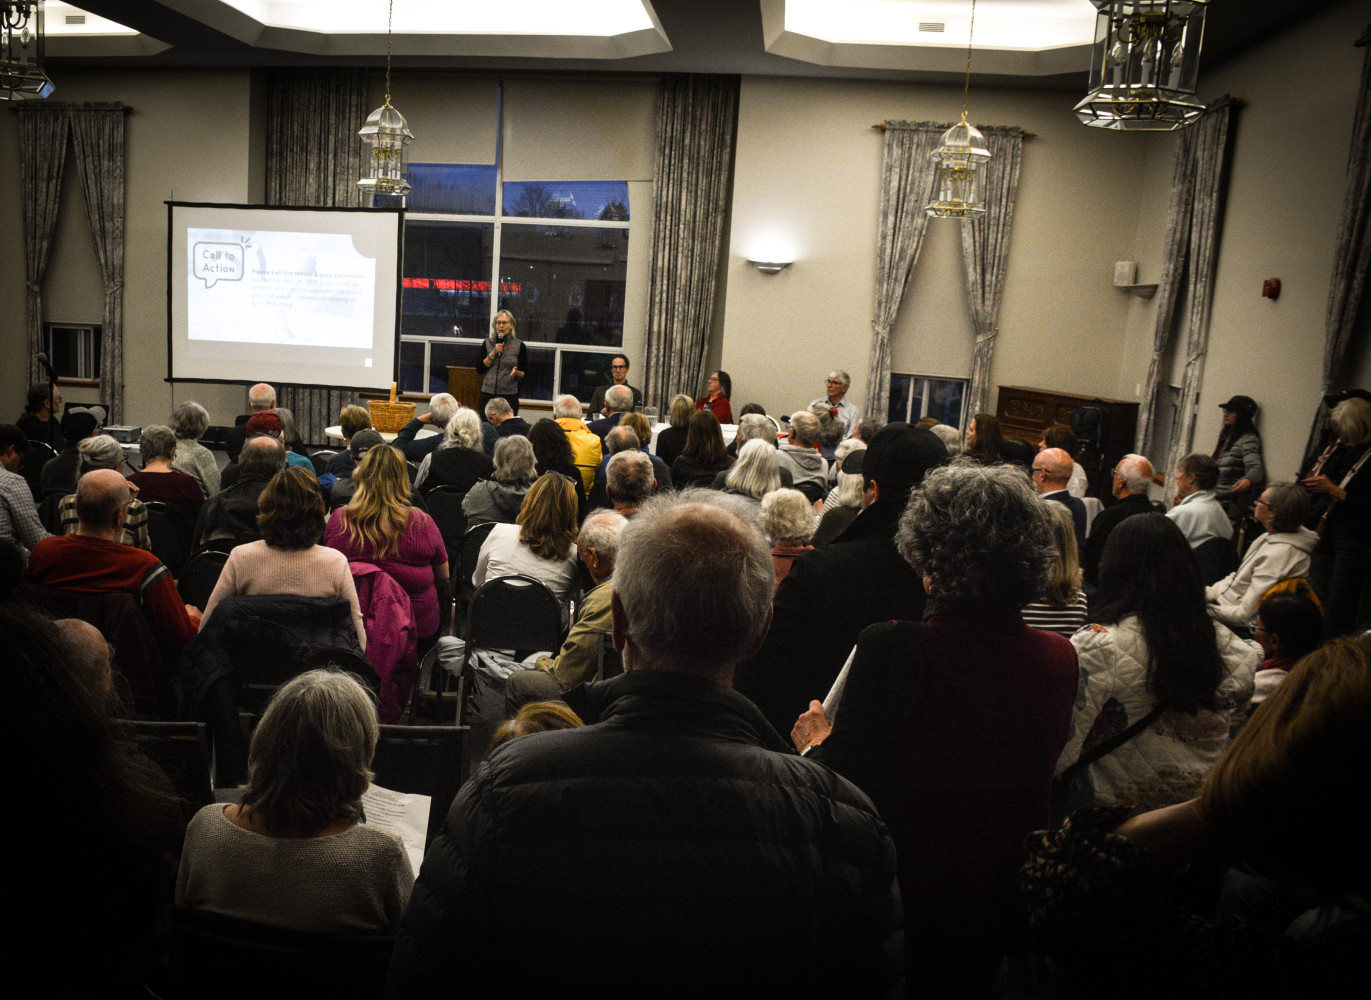 With ‘Caledon under threat’, over 150 residents meet to demand action from Town Council, Mayor Annette Groves